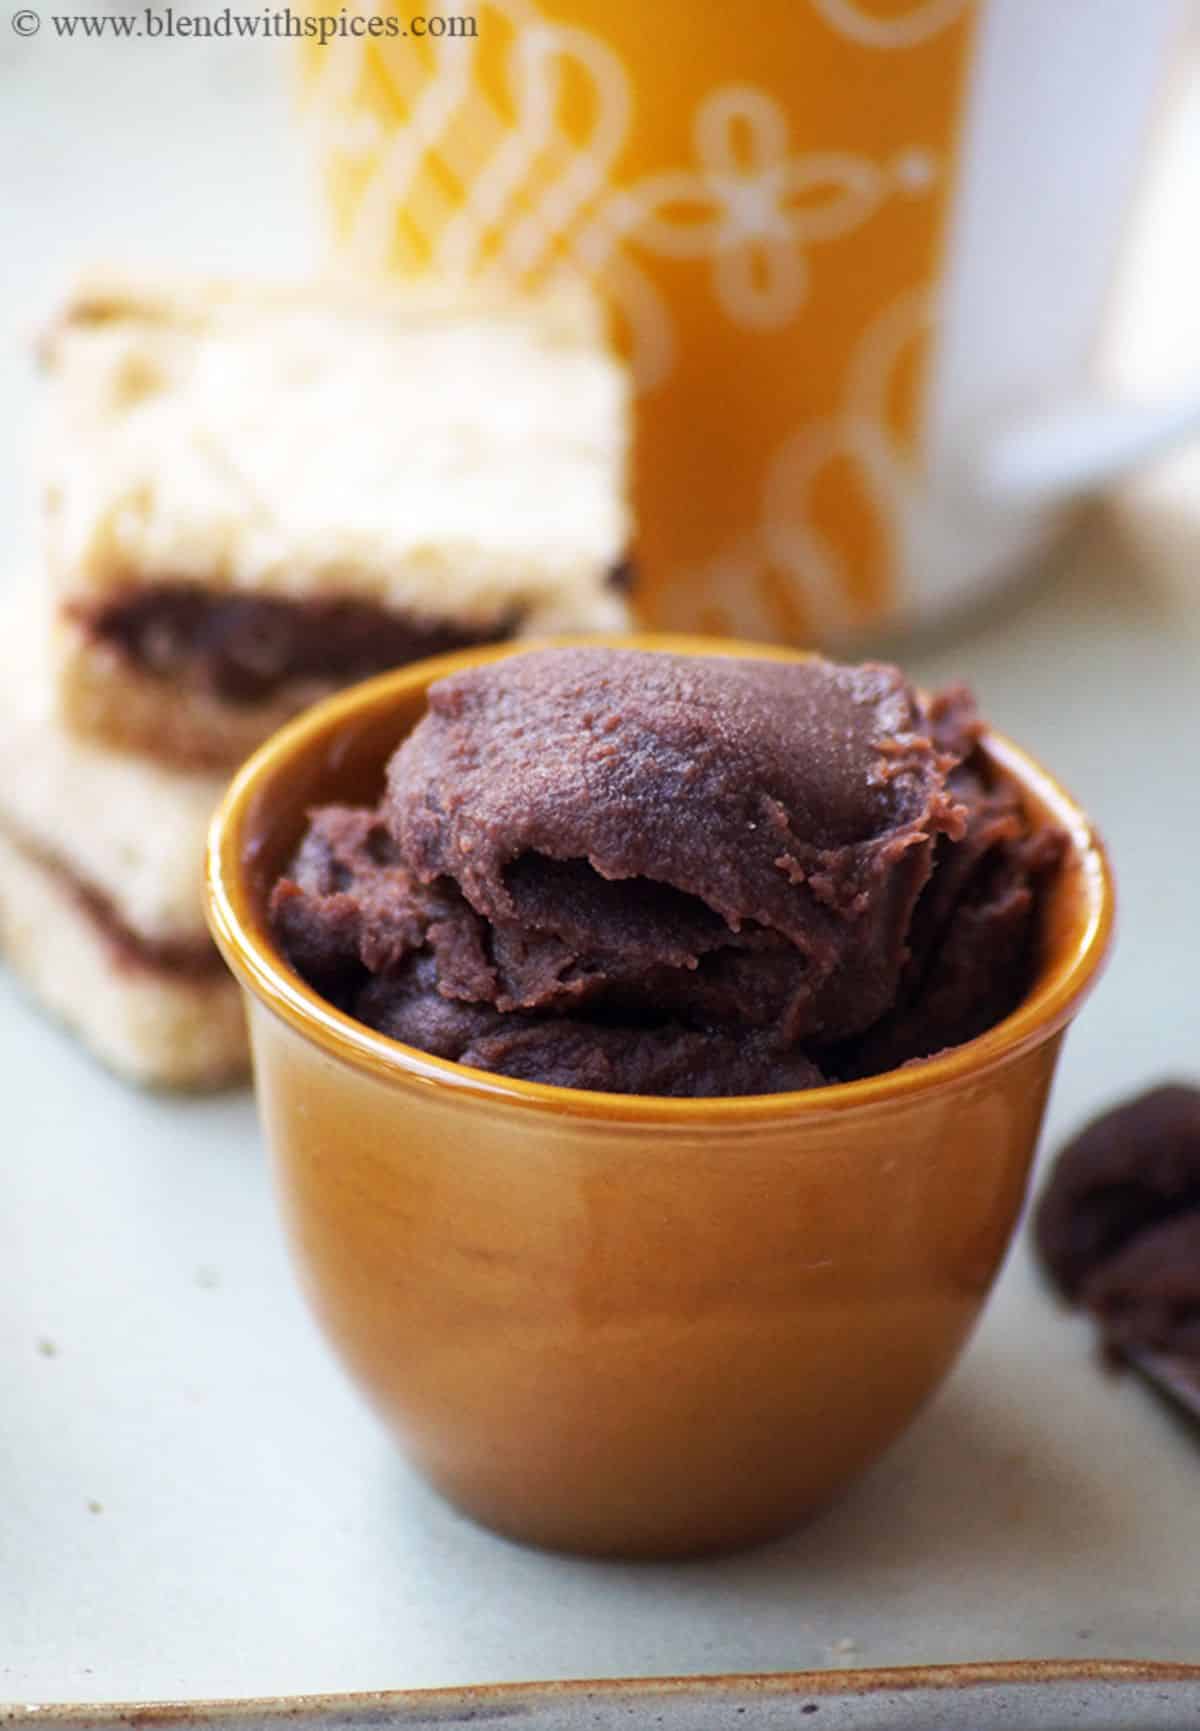 Creamy chestnut chocolate spread in a brown cup.